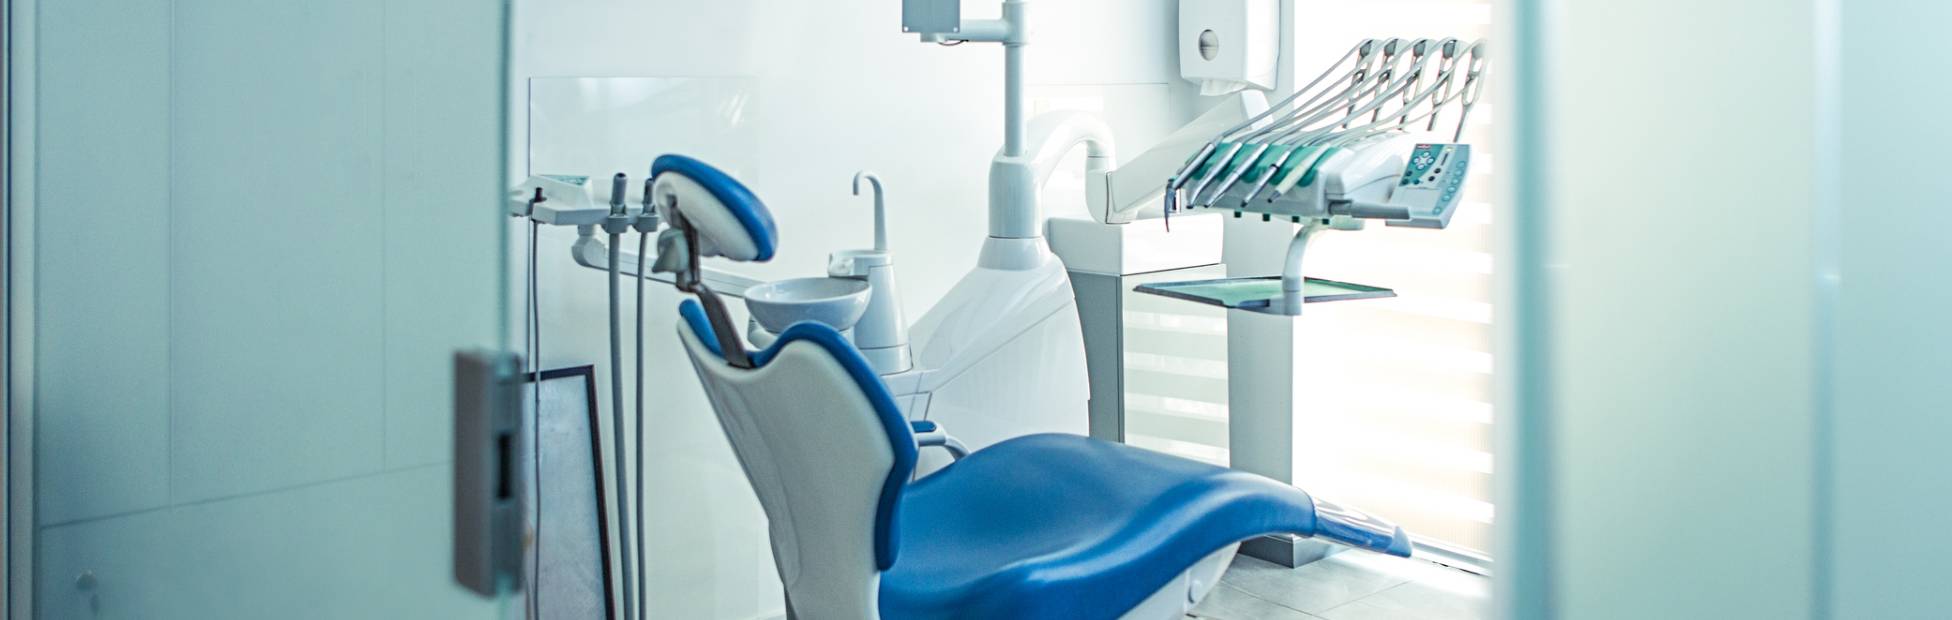 An image showing a dentist office interior